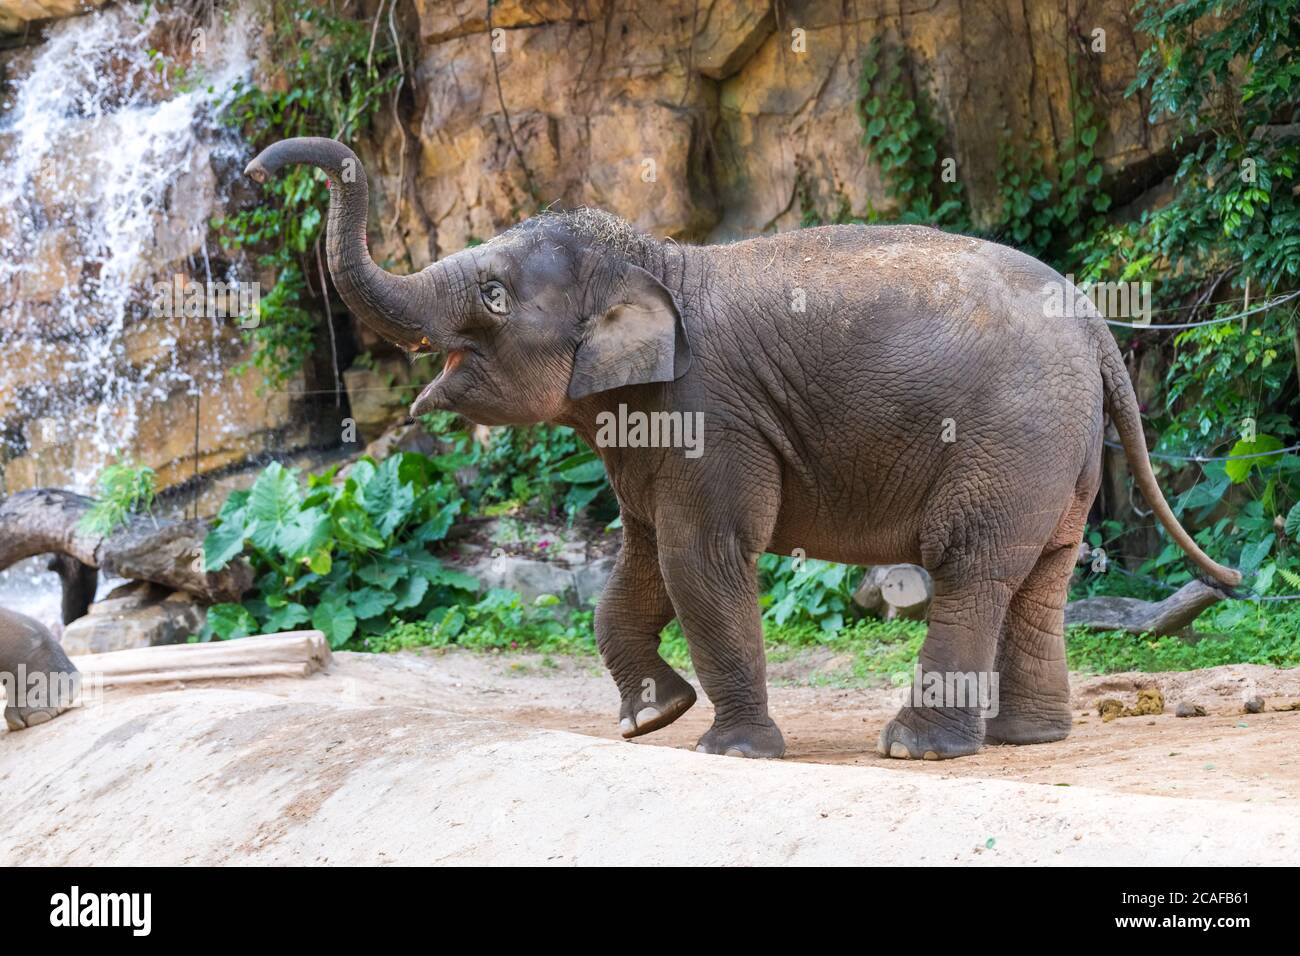 Asian elephant in the zoo Stock Photo